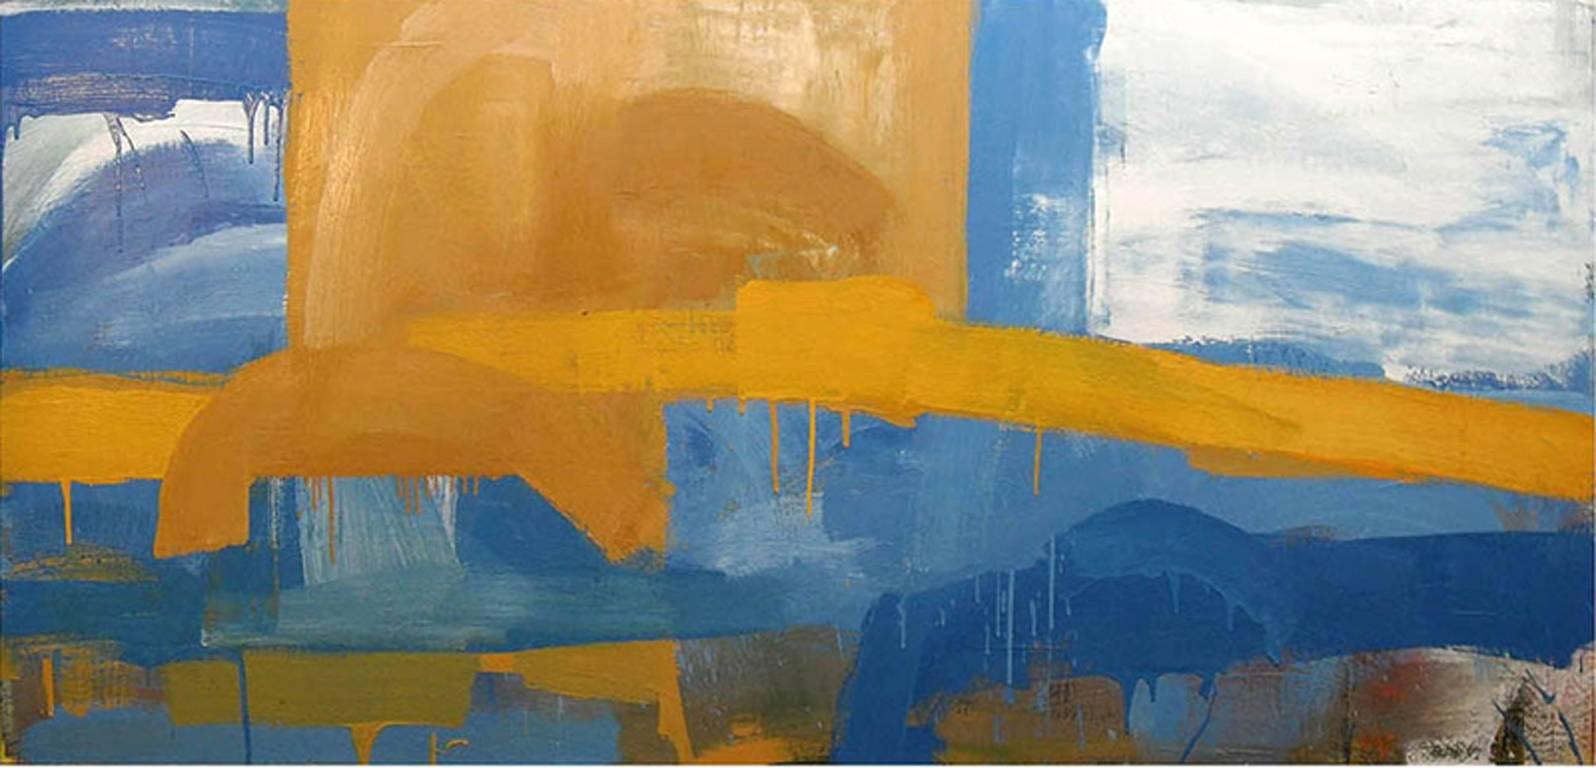 Christopher Engel Abstract Painting - Canyon (Abstracted Landscape Painting, Oil on Canvas in Sky Blue & Yellow)